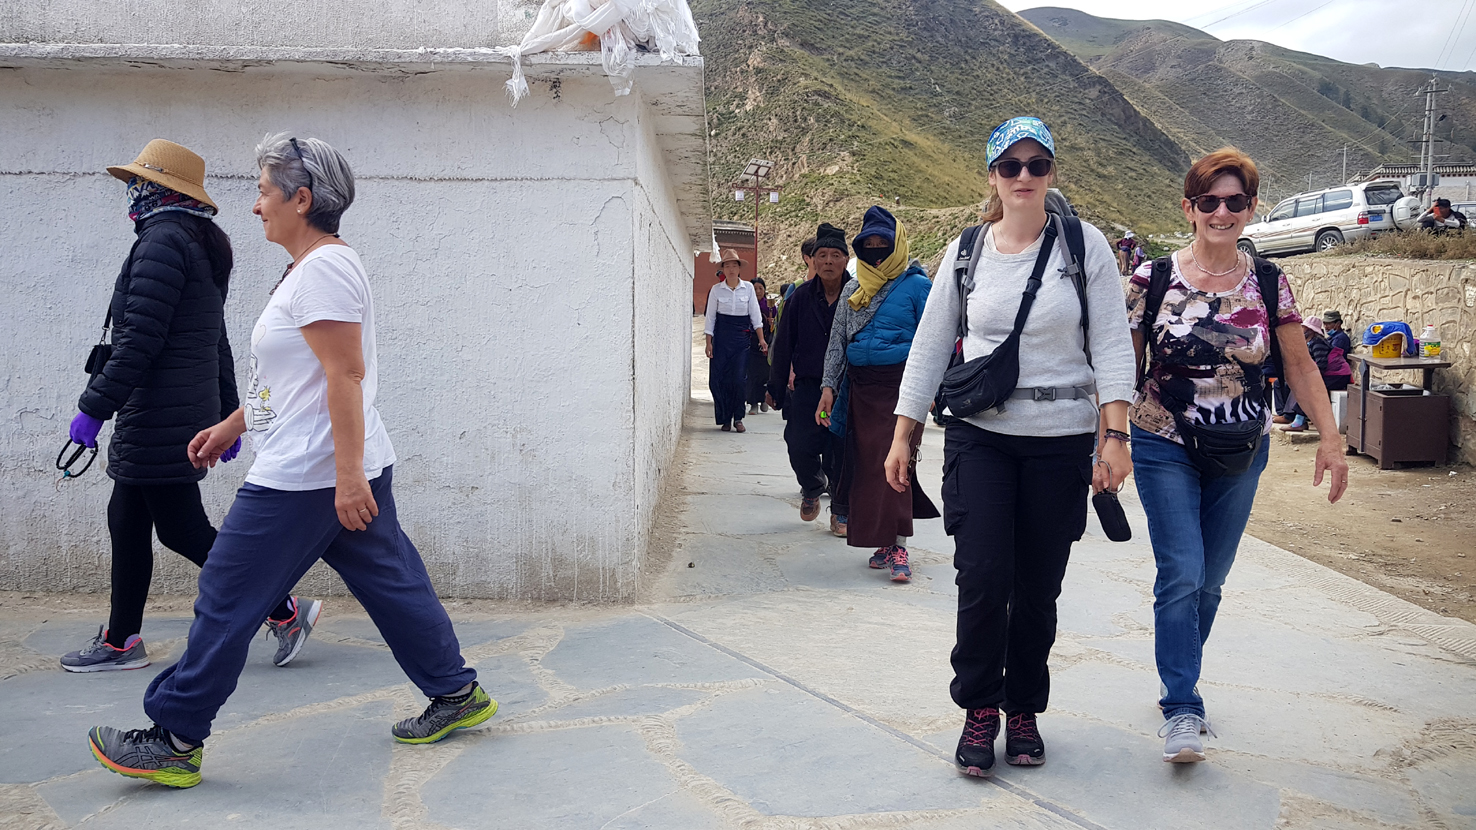 20180920_Kloster-Labrang (496)